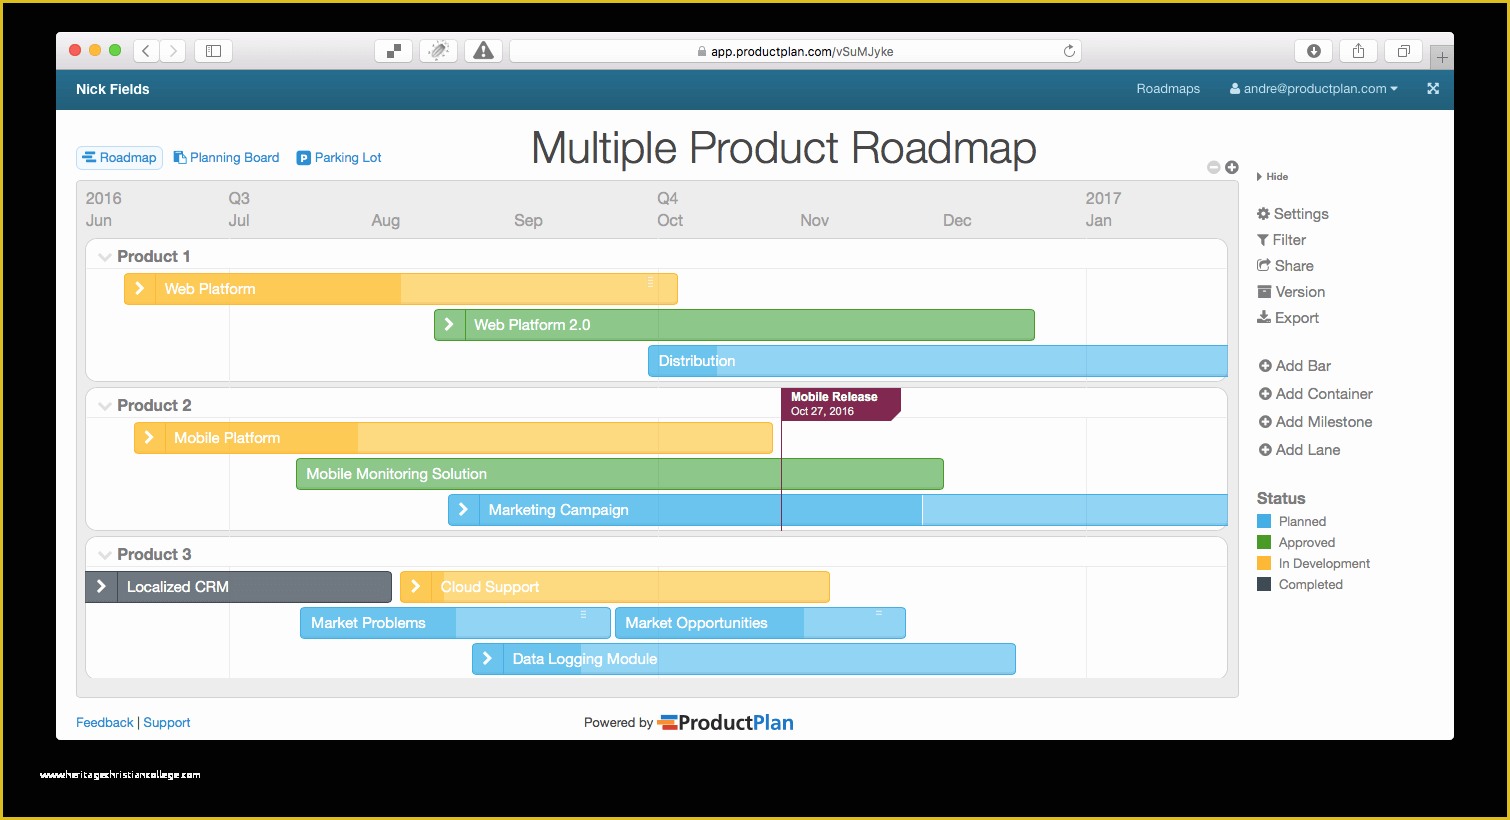 Free Marketing Roadmap Template Of 3 Example Roadmaps for Product Managers